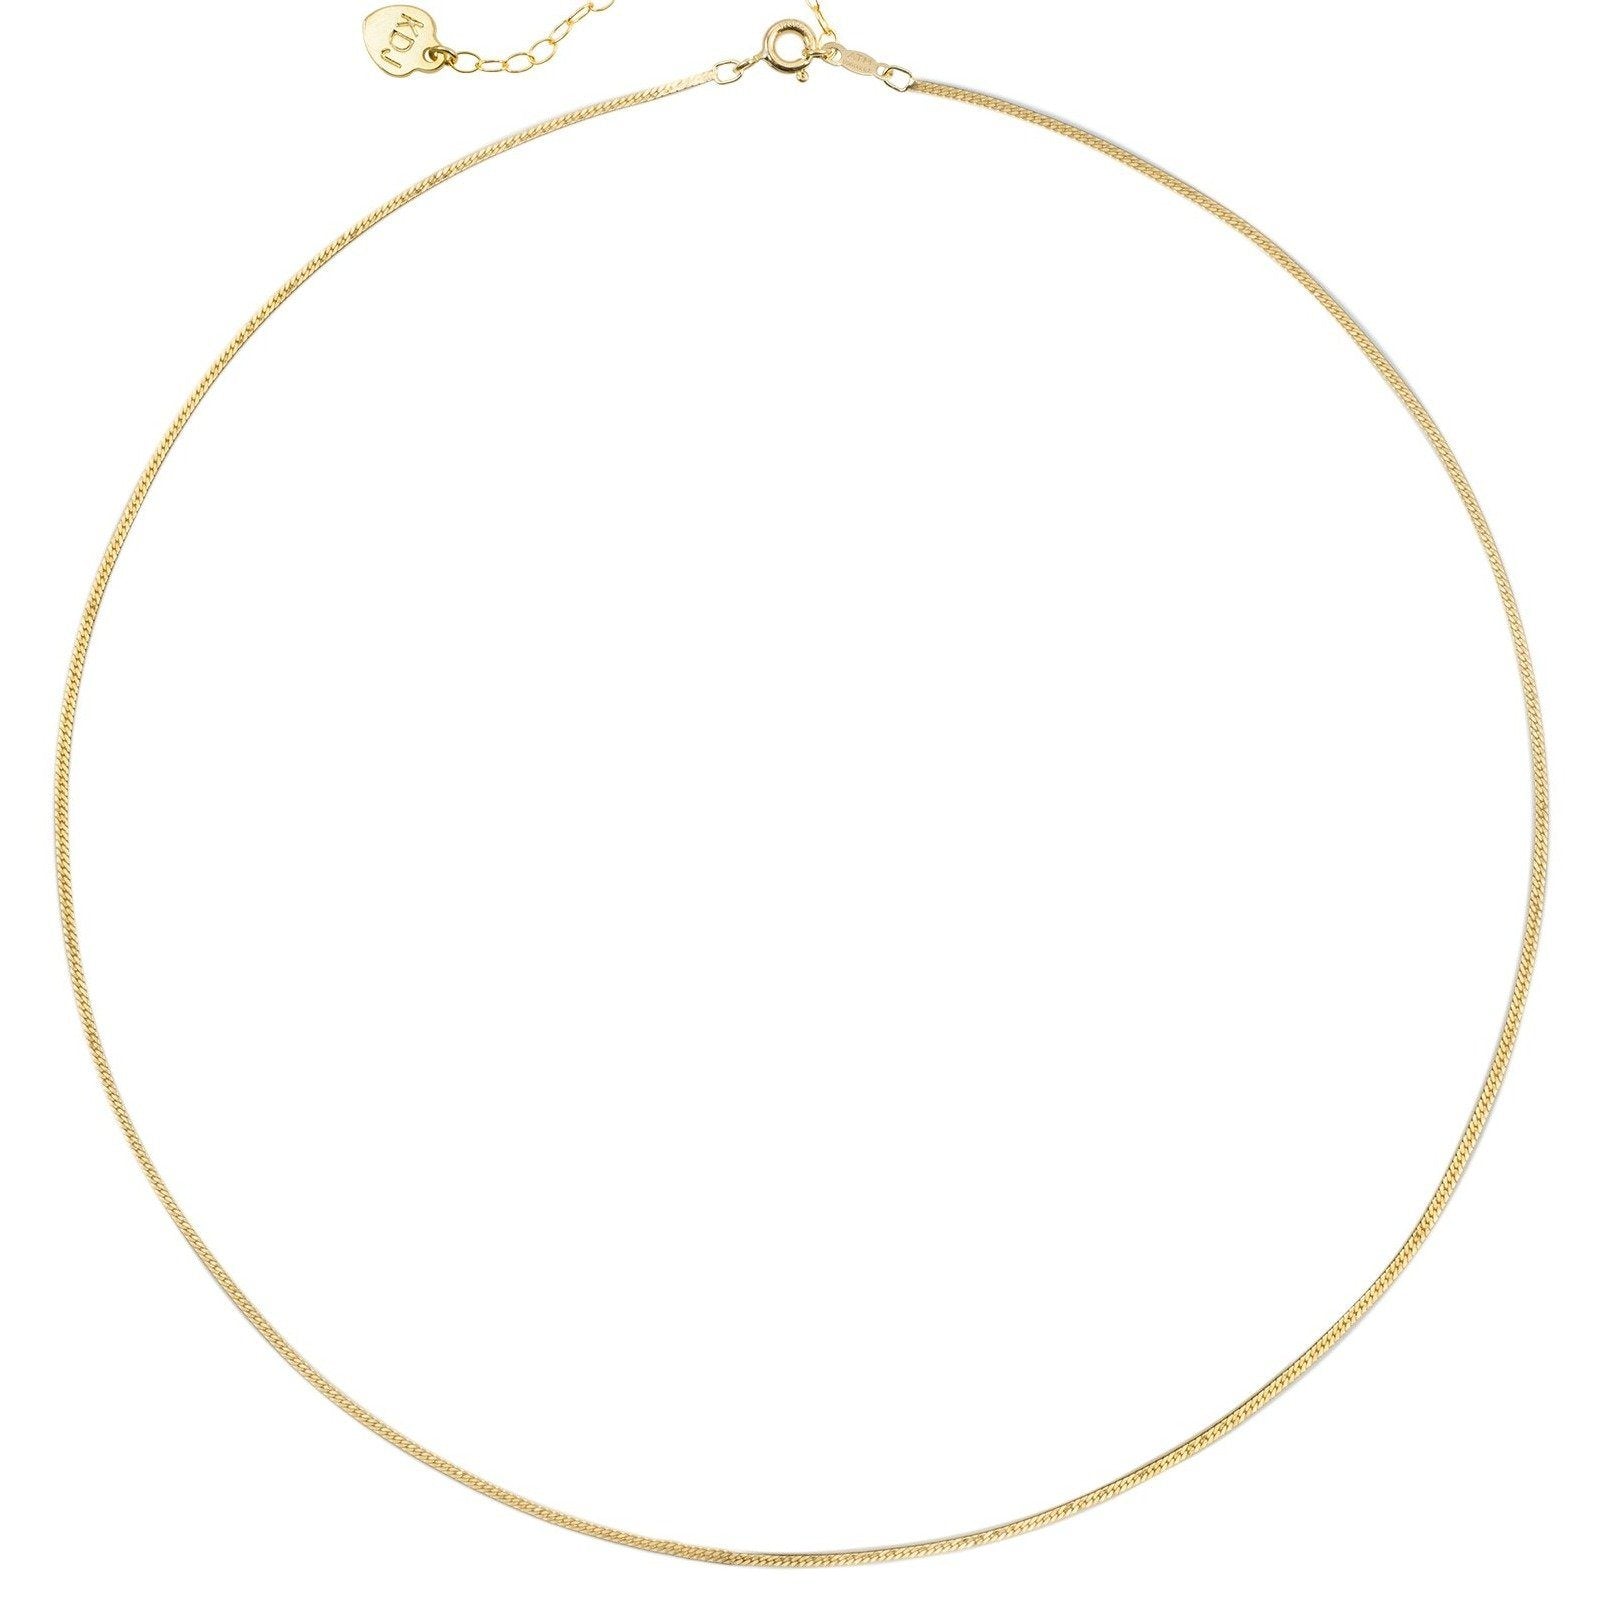 14k gold filled Herringbone Chain Necklace shown on a white background